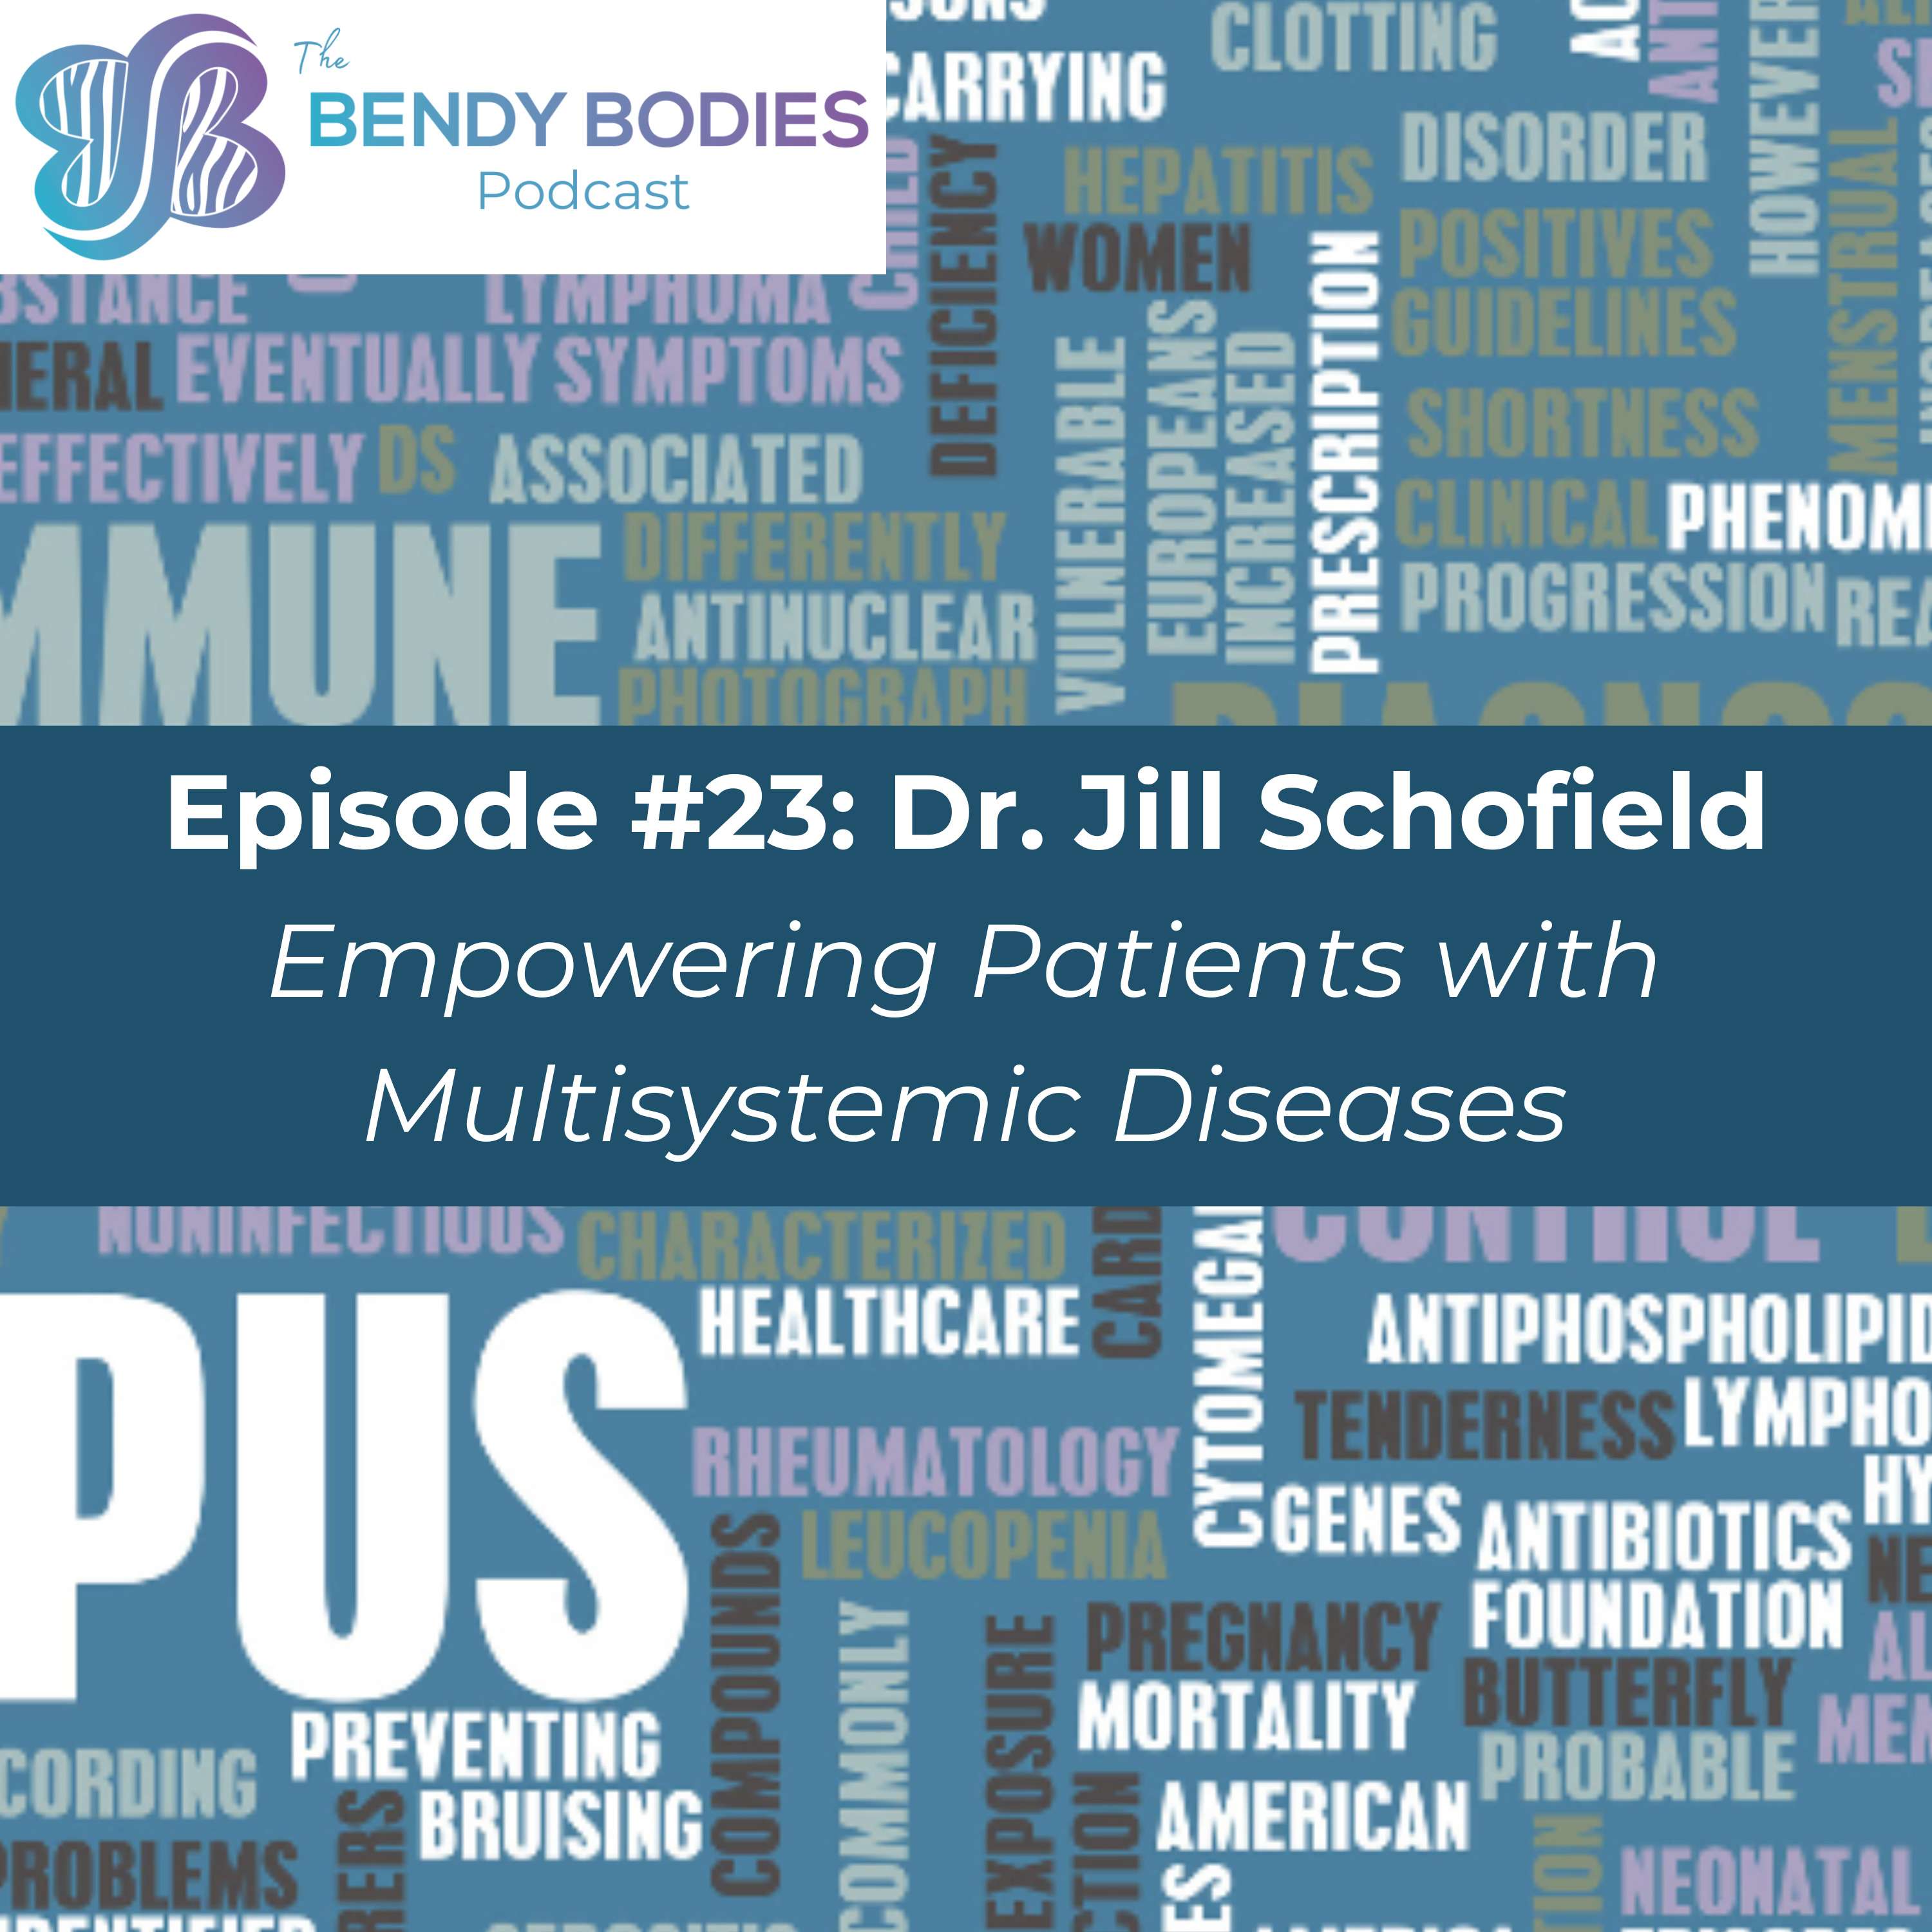 23. Empowering Patients with Multisystemic Diseases with Jill Schofield, M.D.